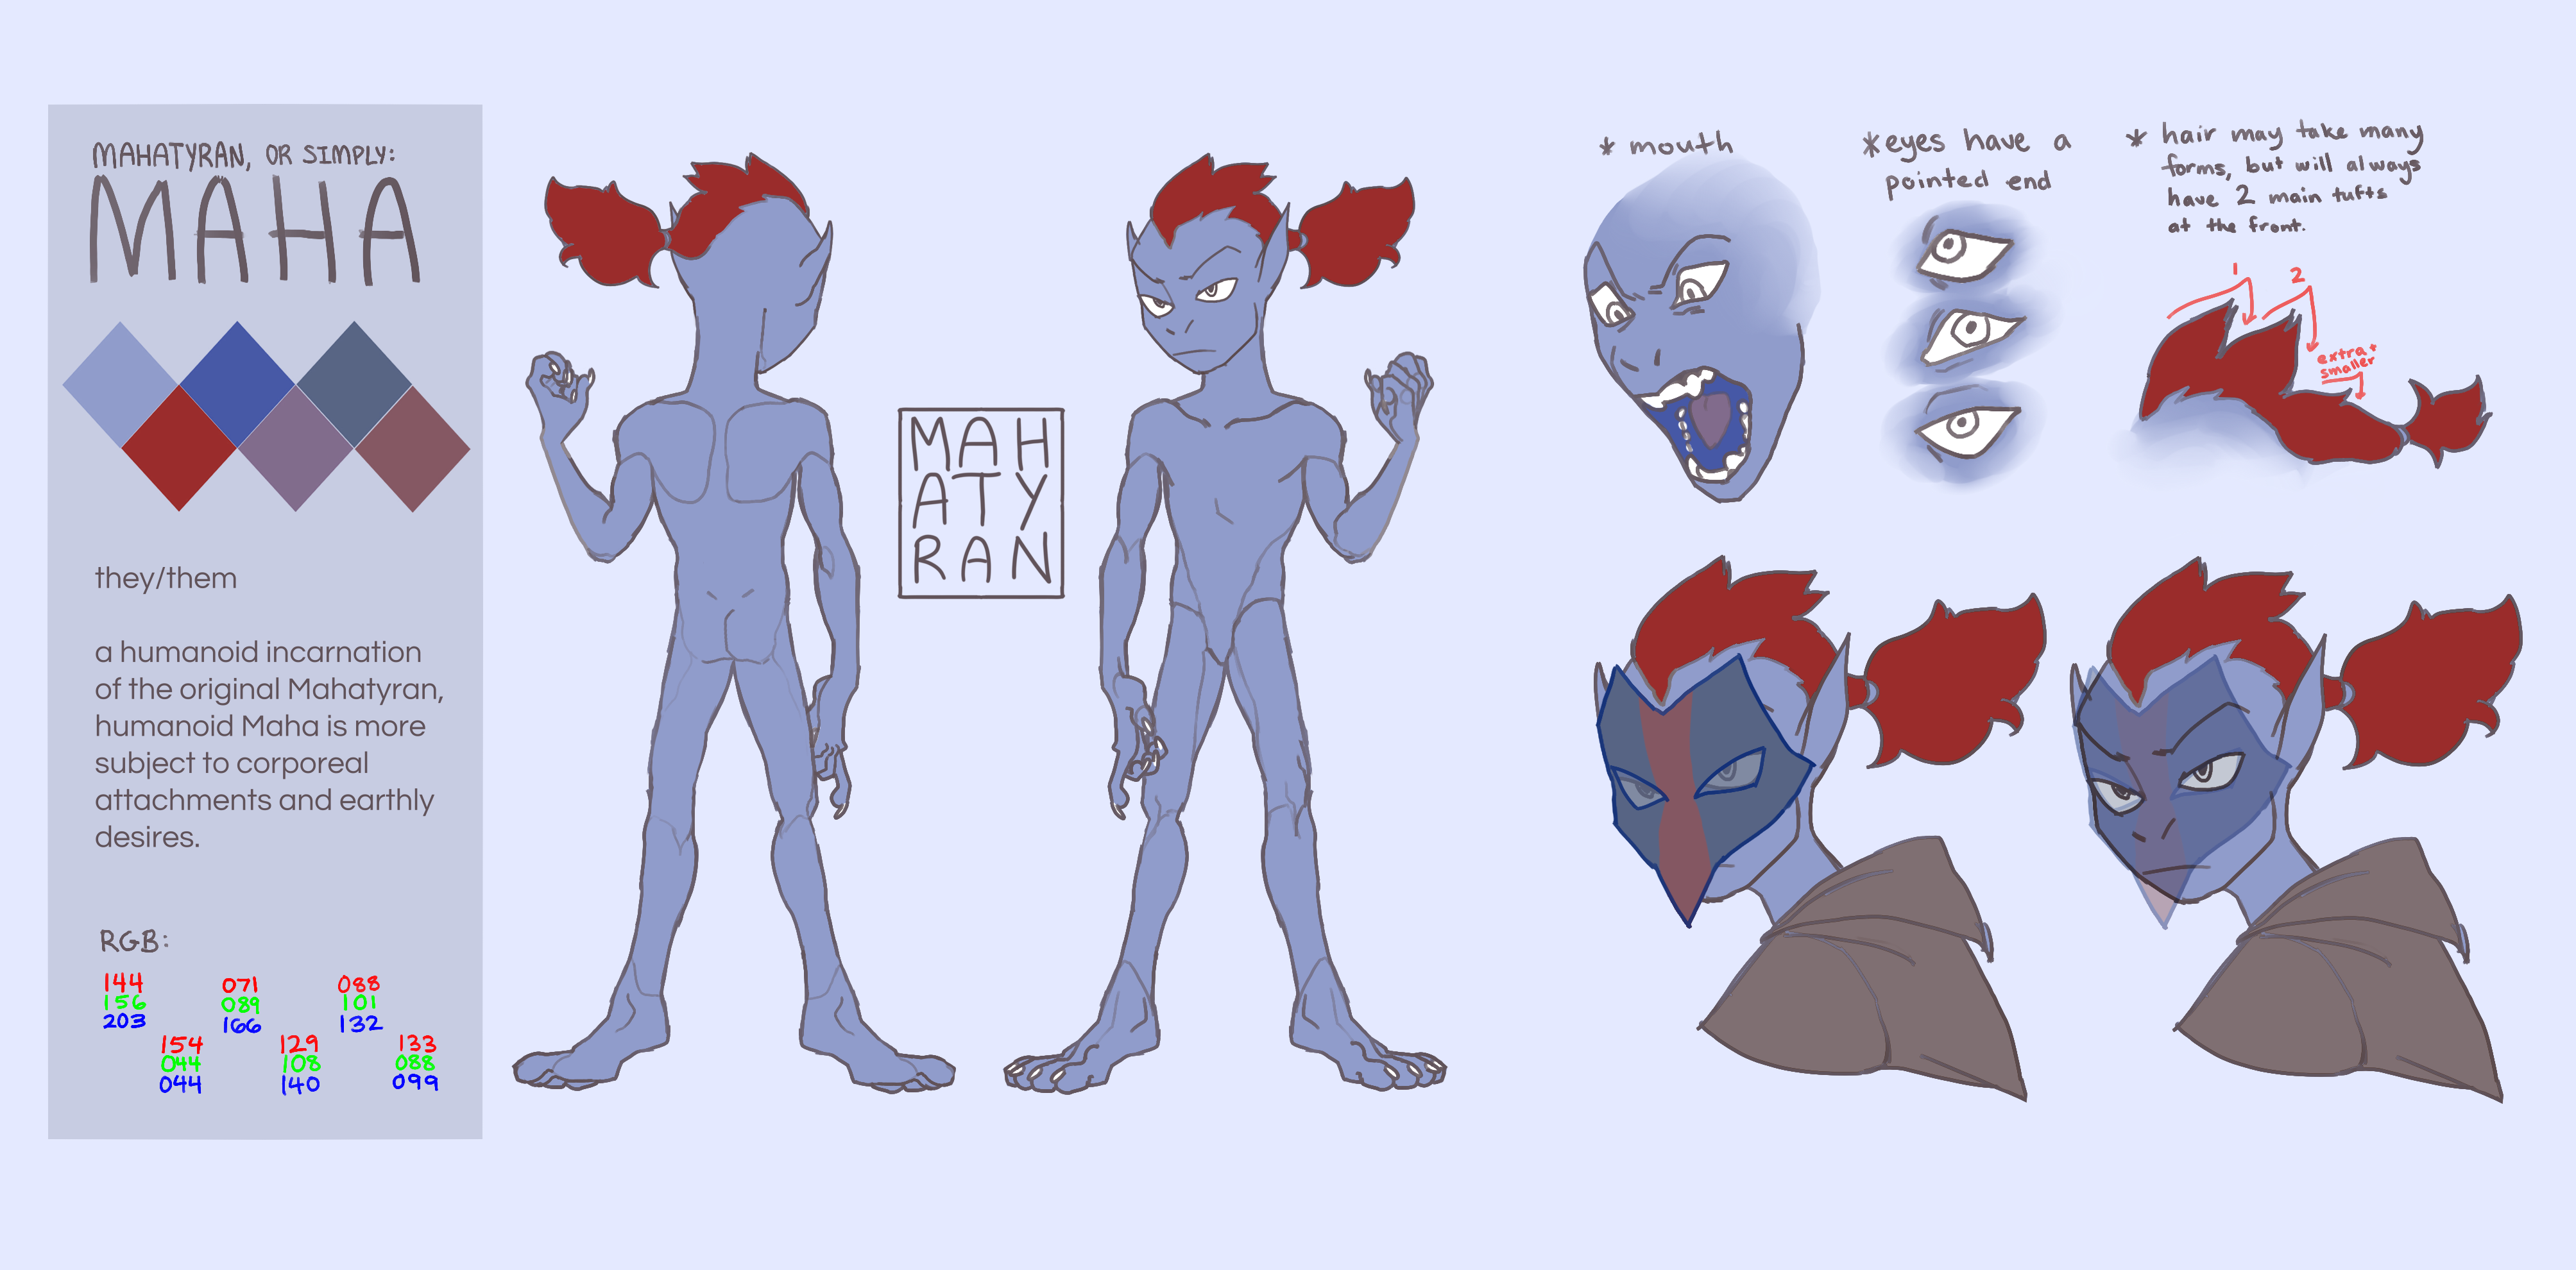 Kaua16 on X: I made a reference sheet for him with some info as